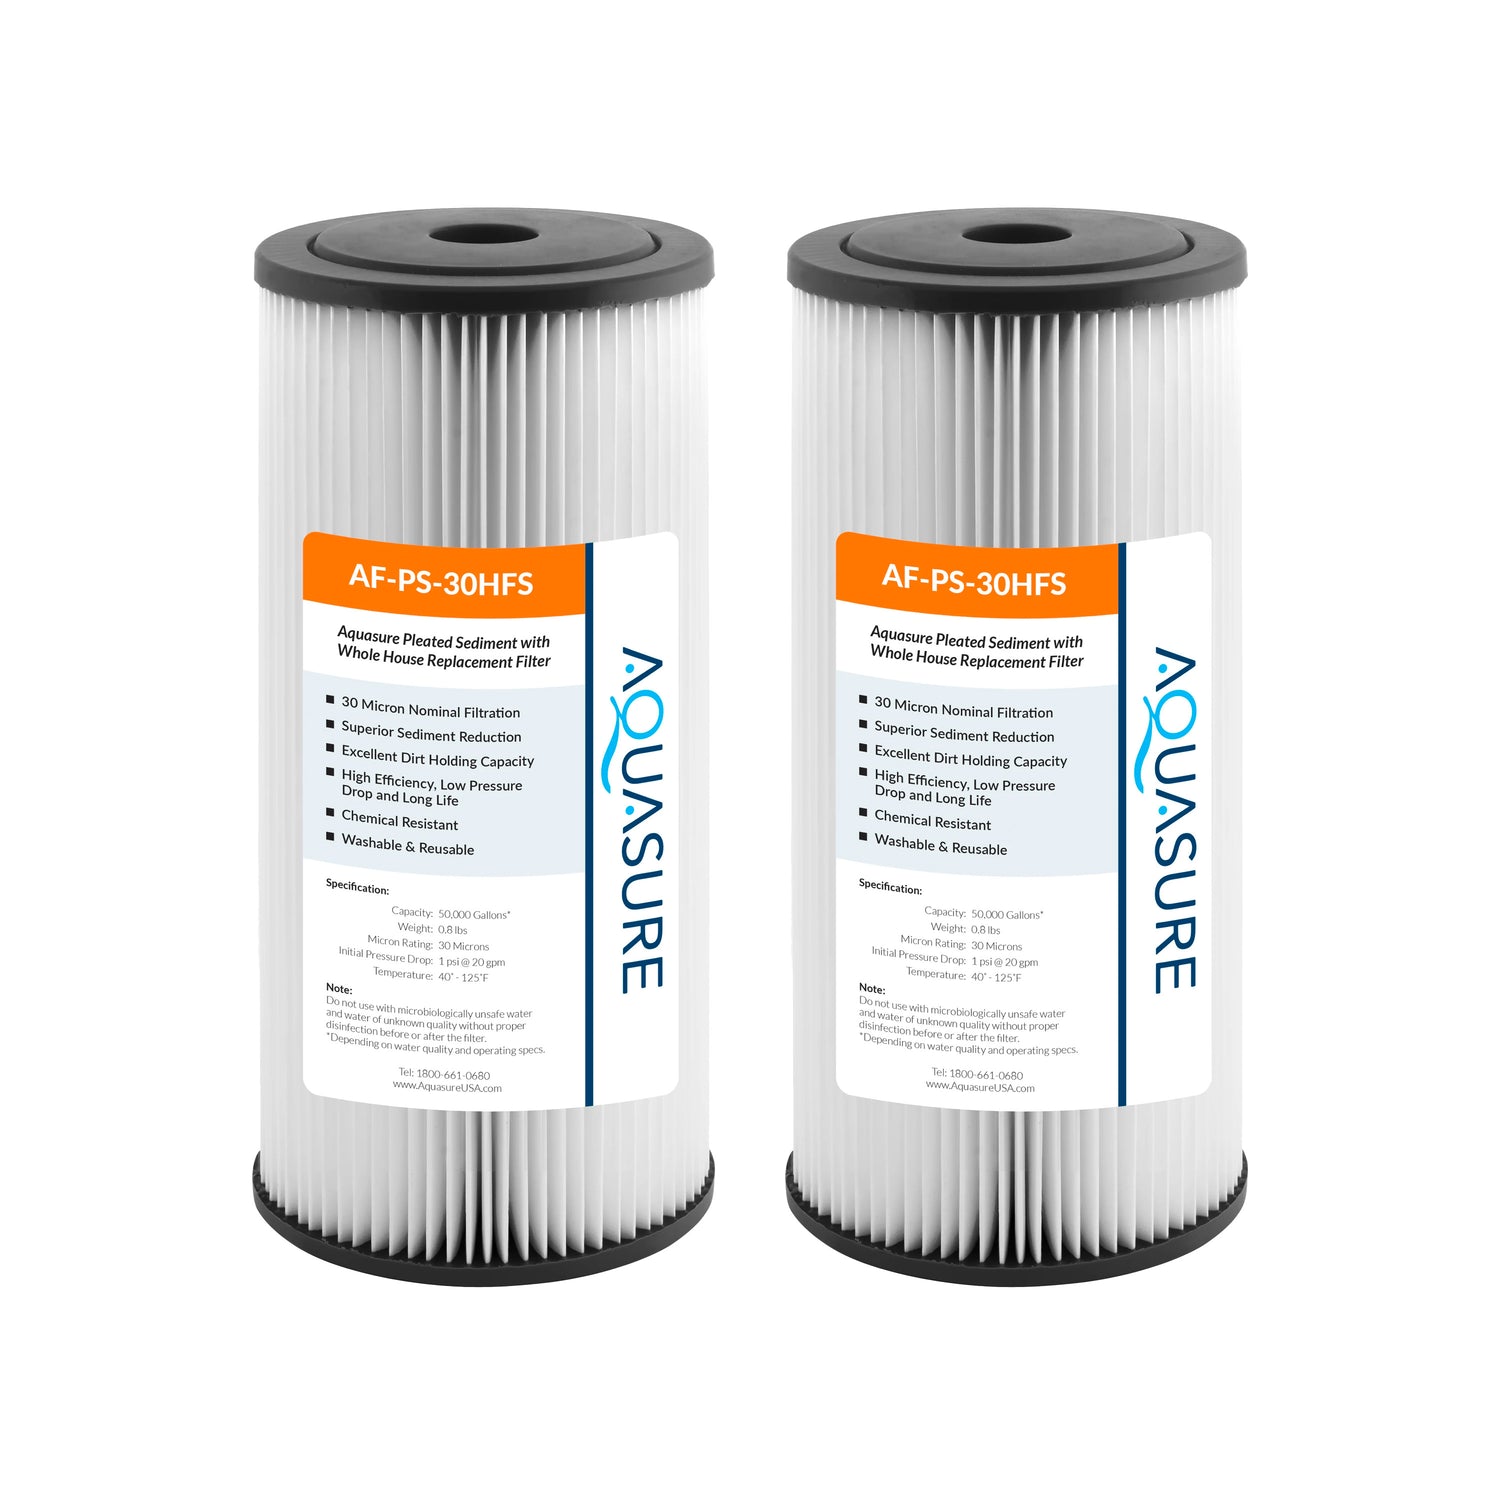 Fortitude V2 Series | High Flow 30 Micron Pleated Sediment Filter - Standard (2-Pack)